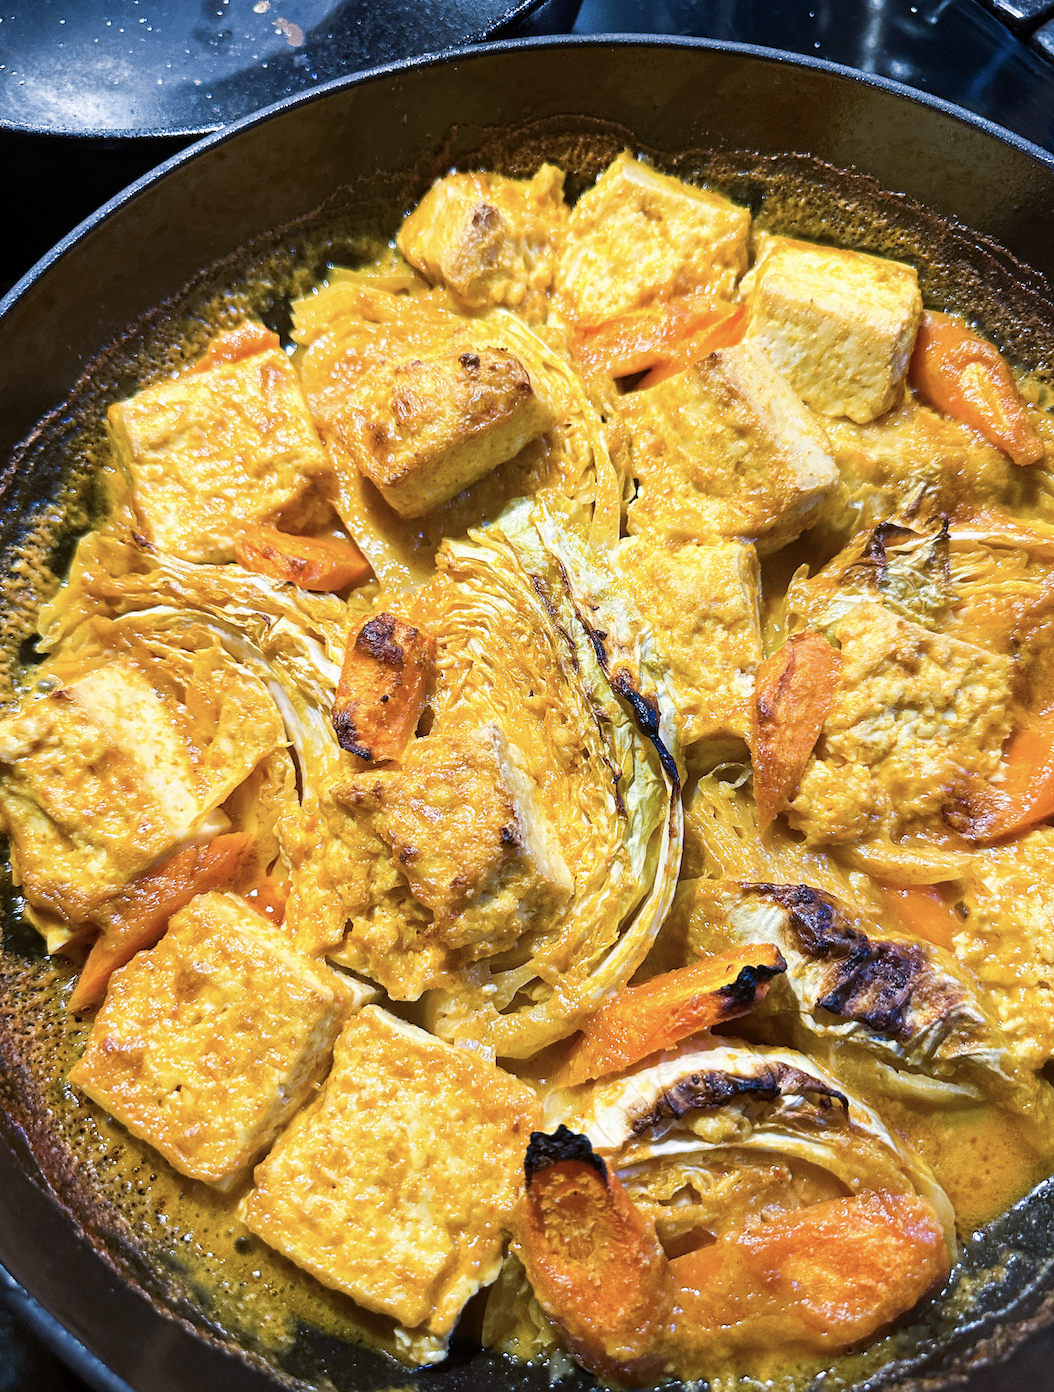 dish of caramelized tofu, cabbage, and carrots in a curry sauce